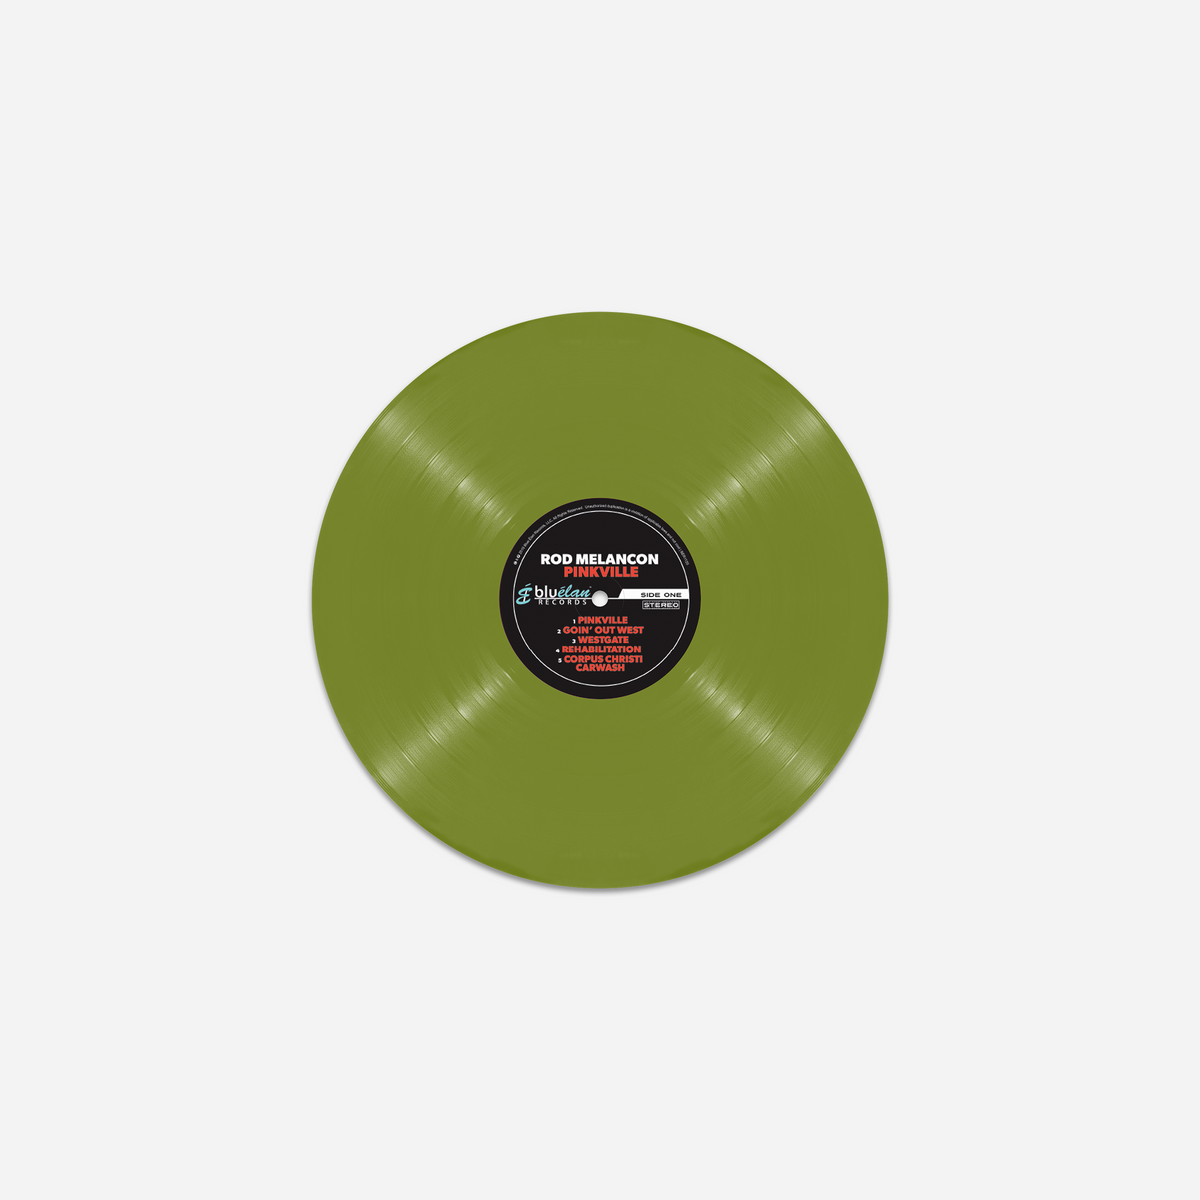 Pinkville - LP in Army Green [LIMITED EDITION]